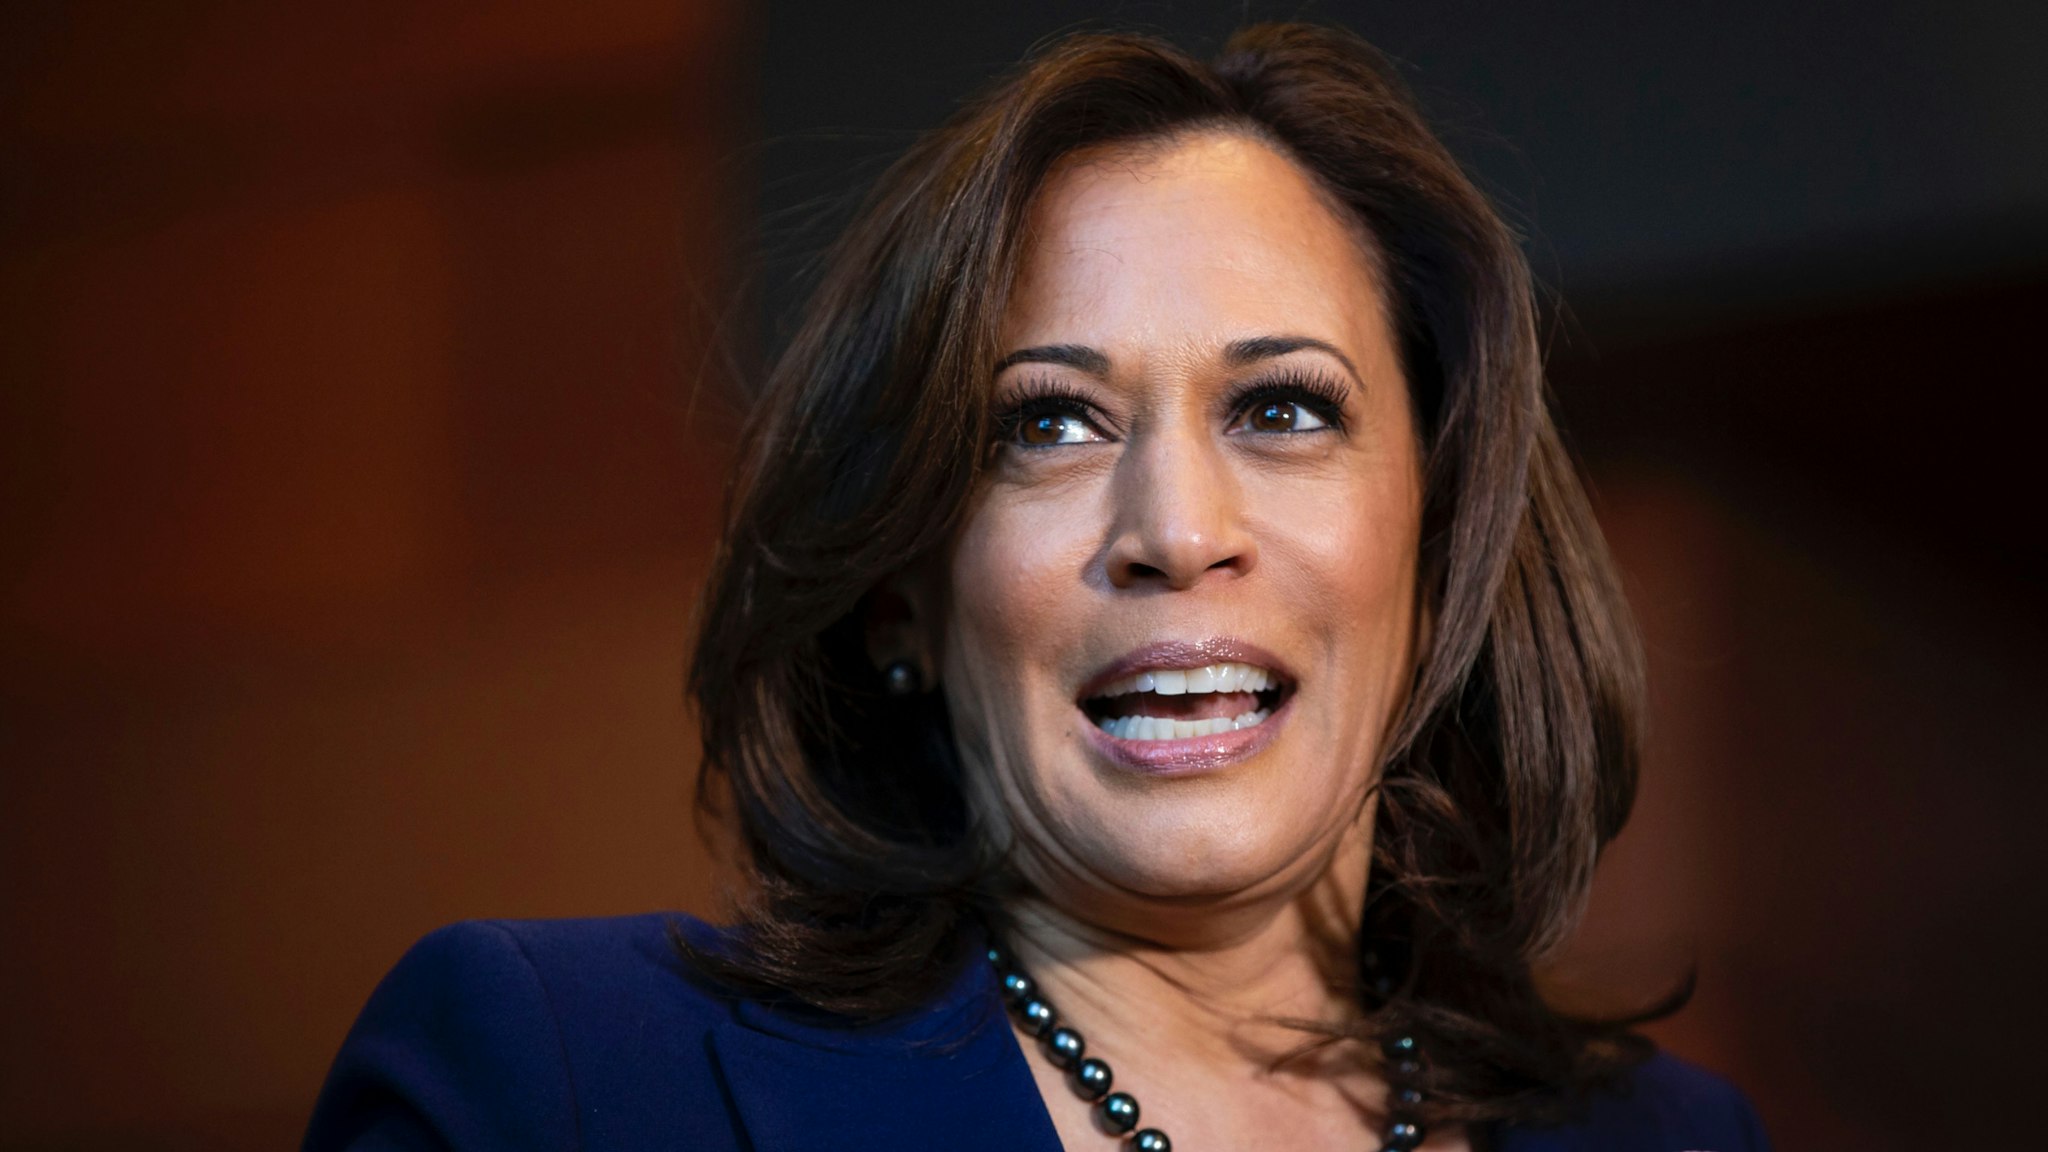 Sen. Kamala Harris (D-CA) speaks to reporters after announcing her candidacy for President of the United States, at Howard University, her alma mater, on January 21, 2019 in Washington, DC.